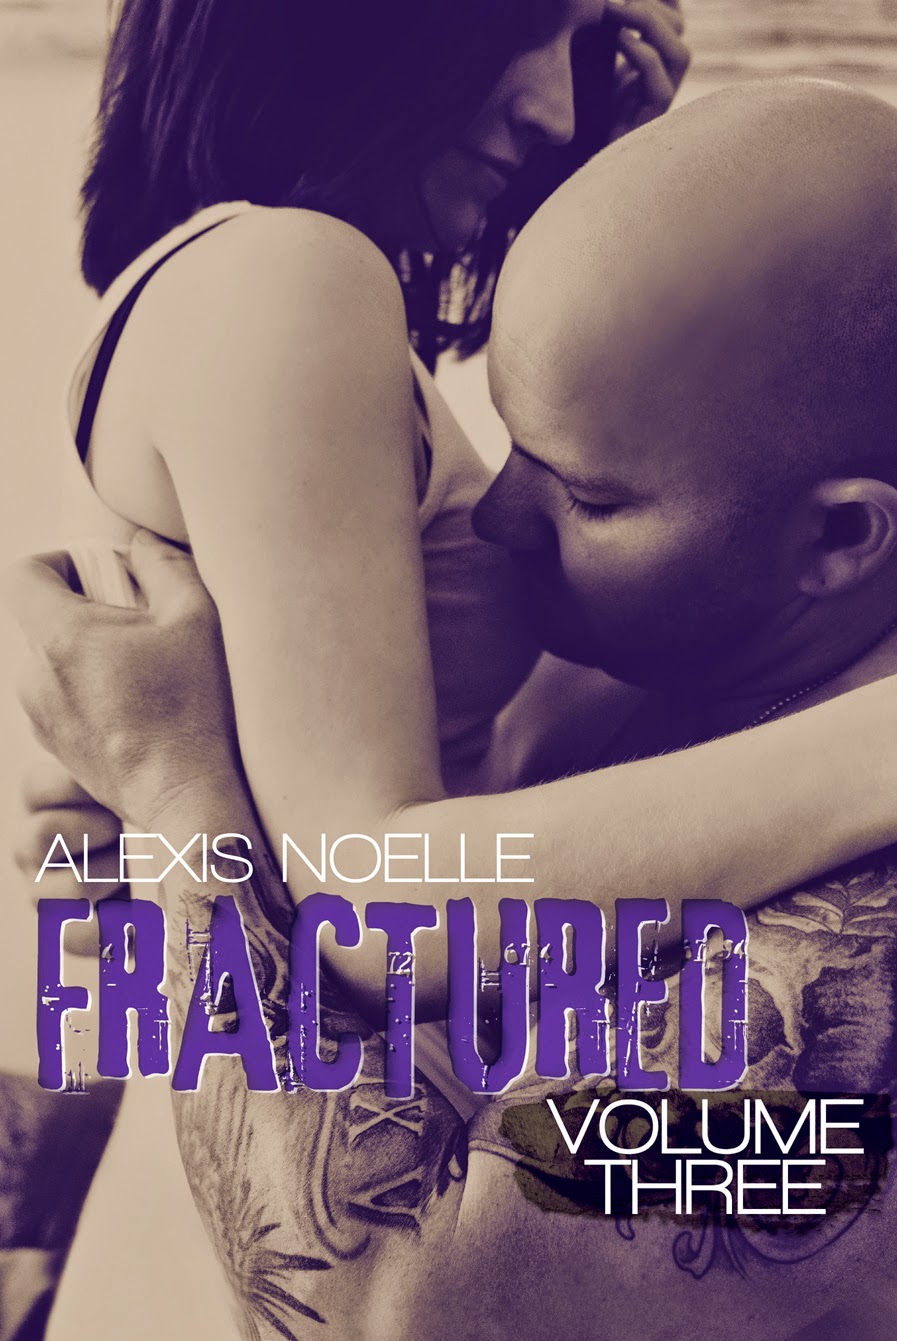 Release Day: Fractured Volume Three by Alexis Noelle